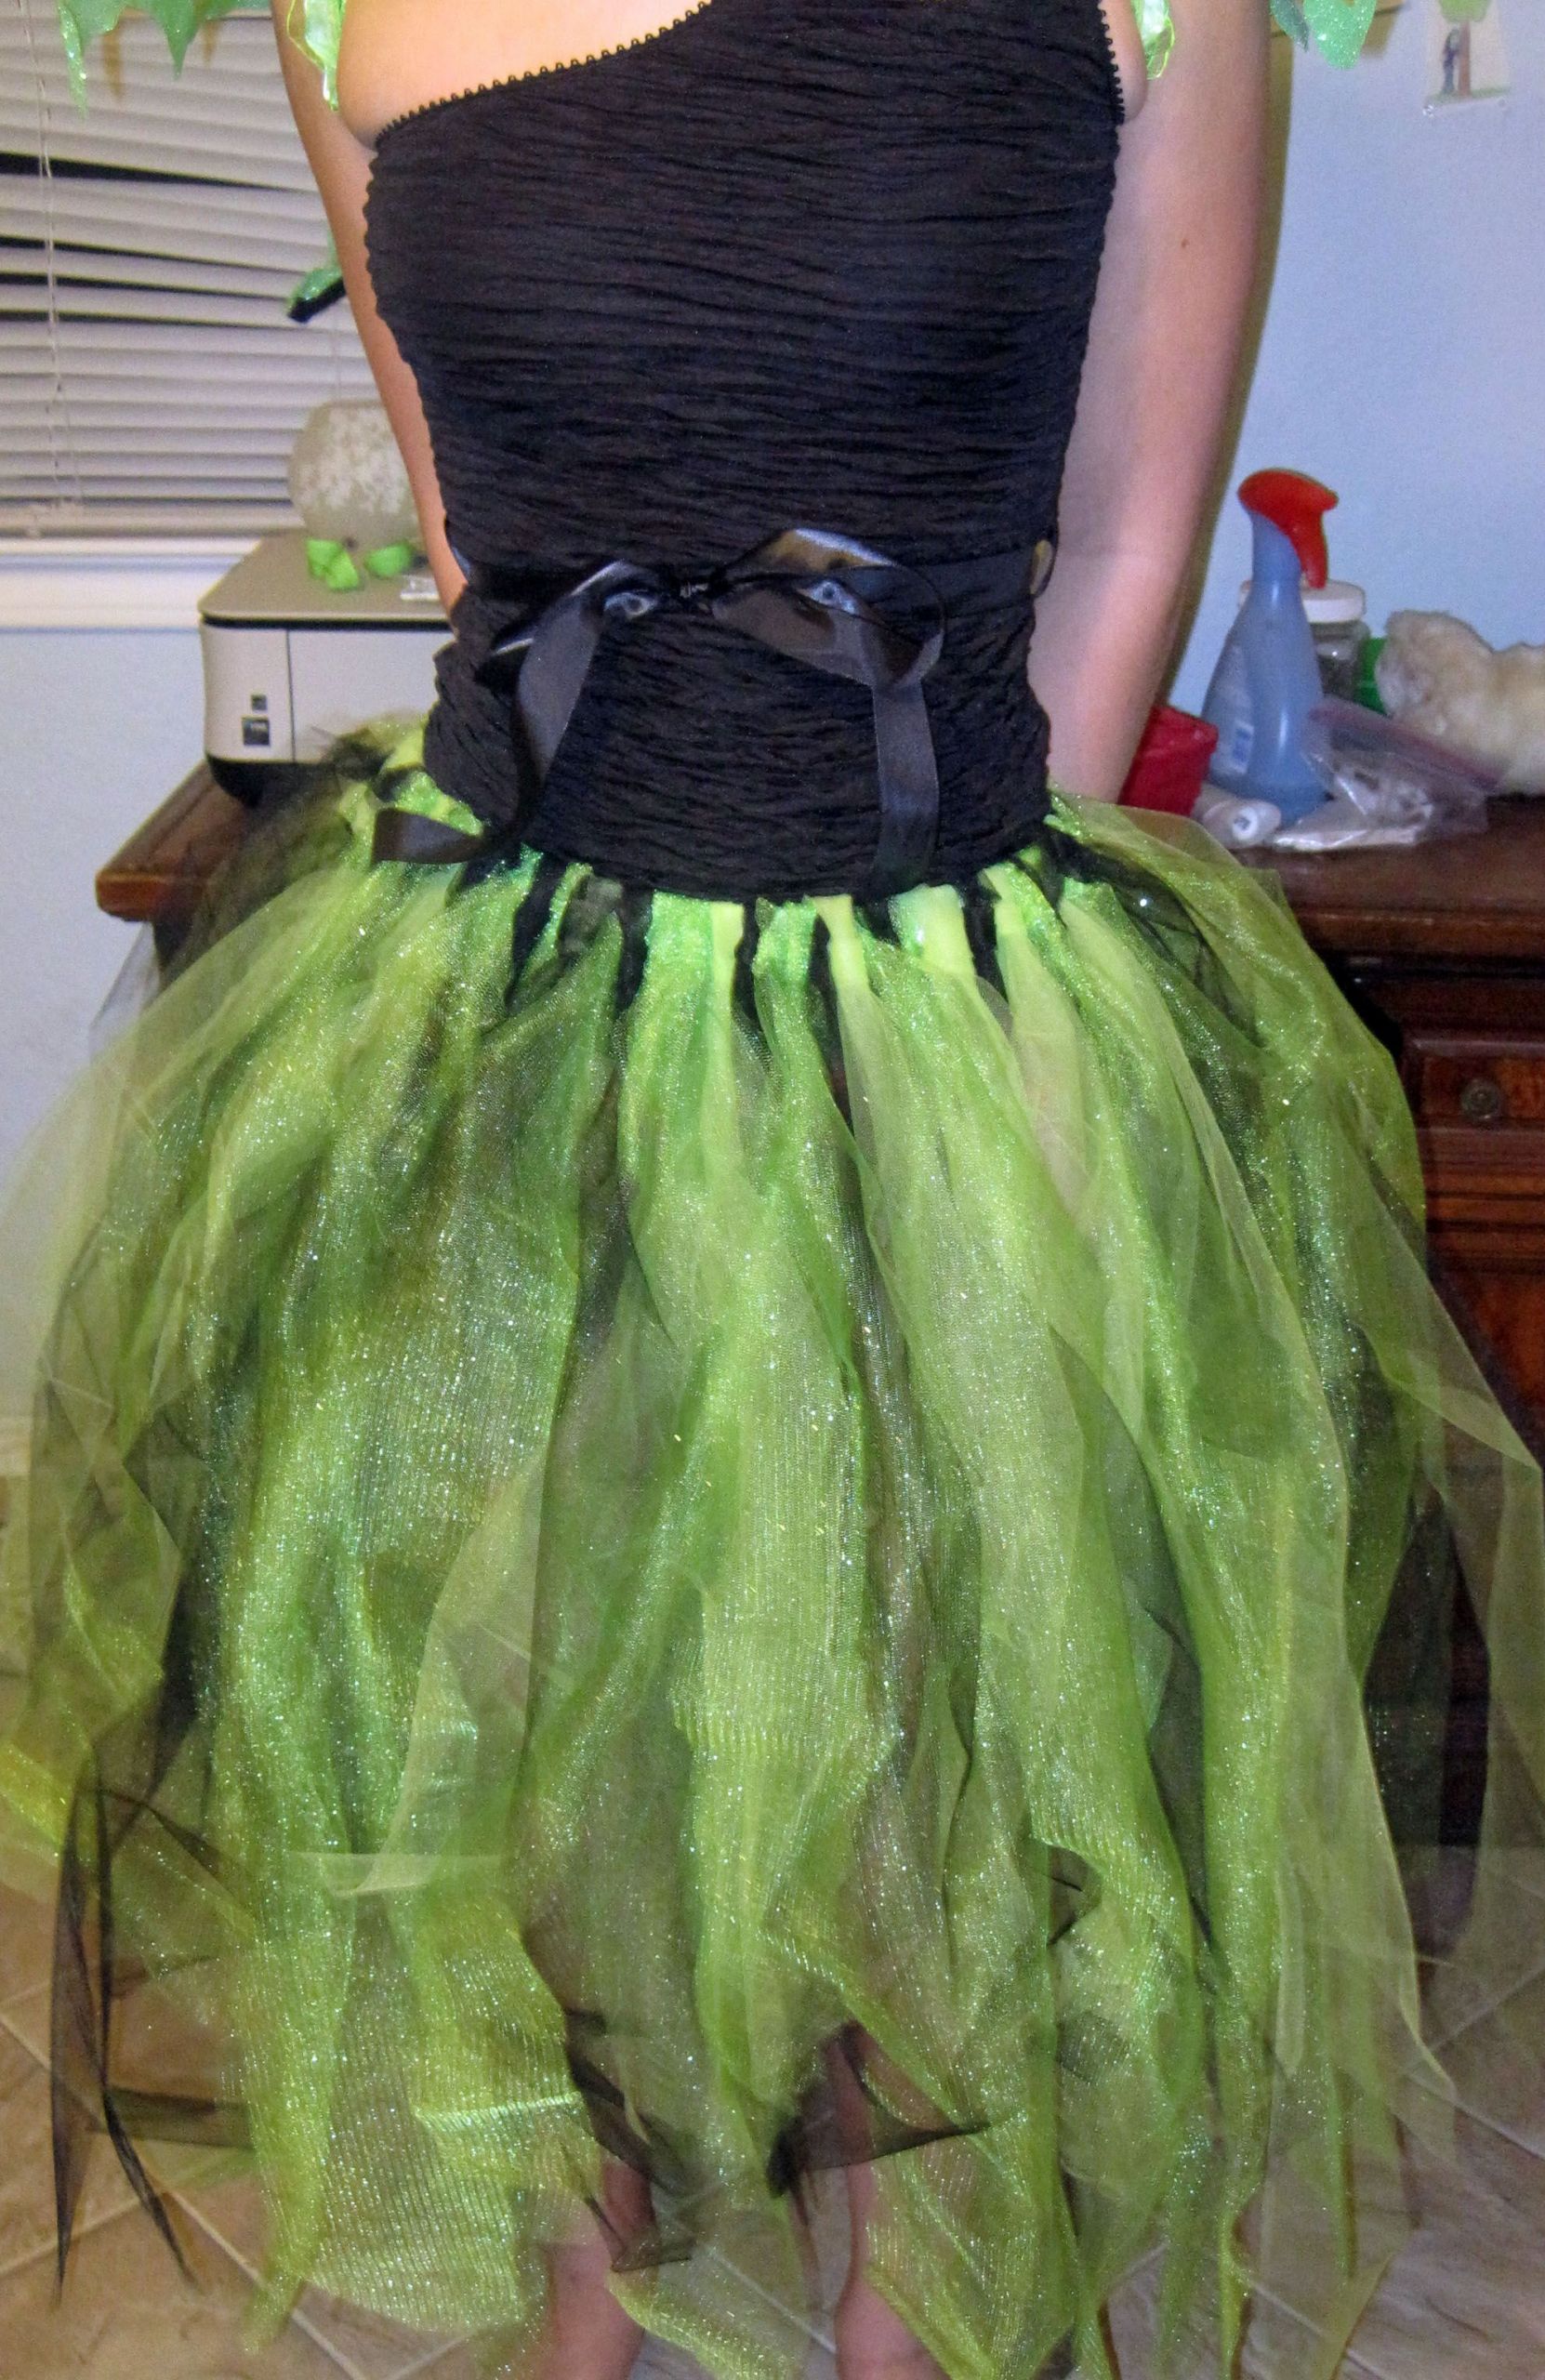 Tutu Skirts For Adults DIY
 Our DIY Tutu skirt for my daughter s fairy costume